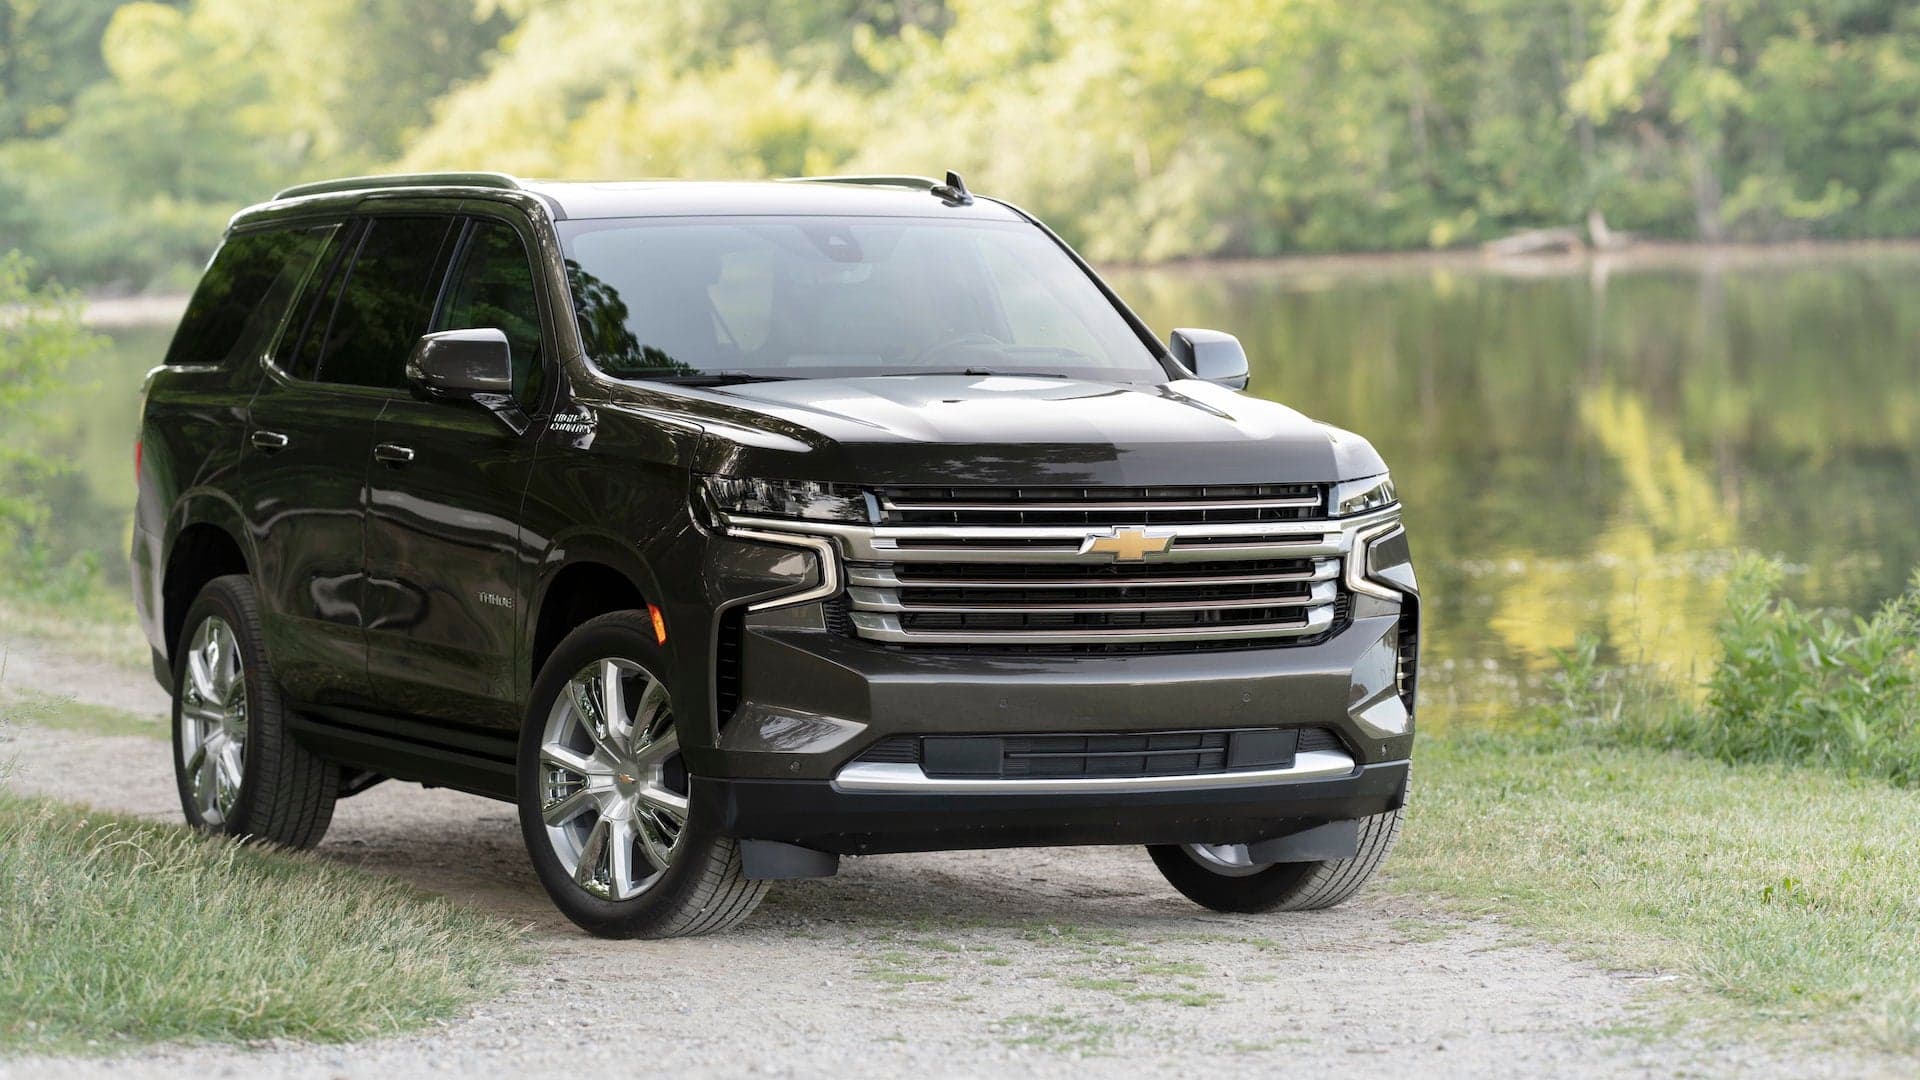 GM Drops Wireless Charging From 2021 Tahoe, Yukon SUVs Over Chip Shortage